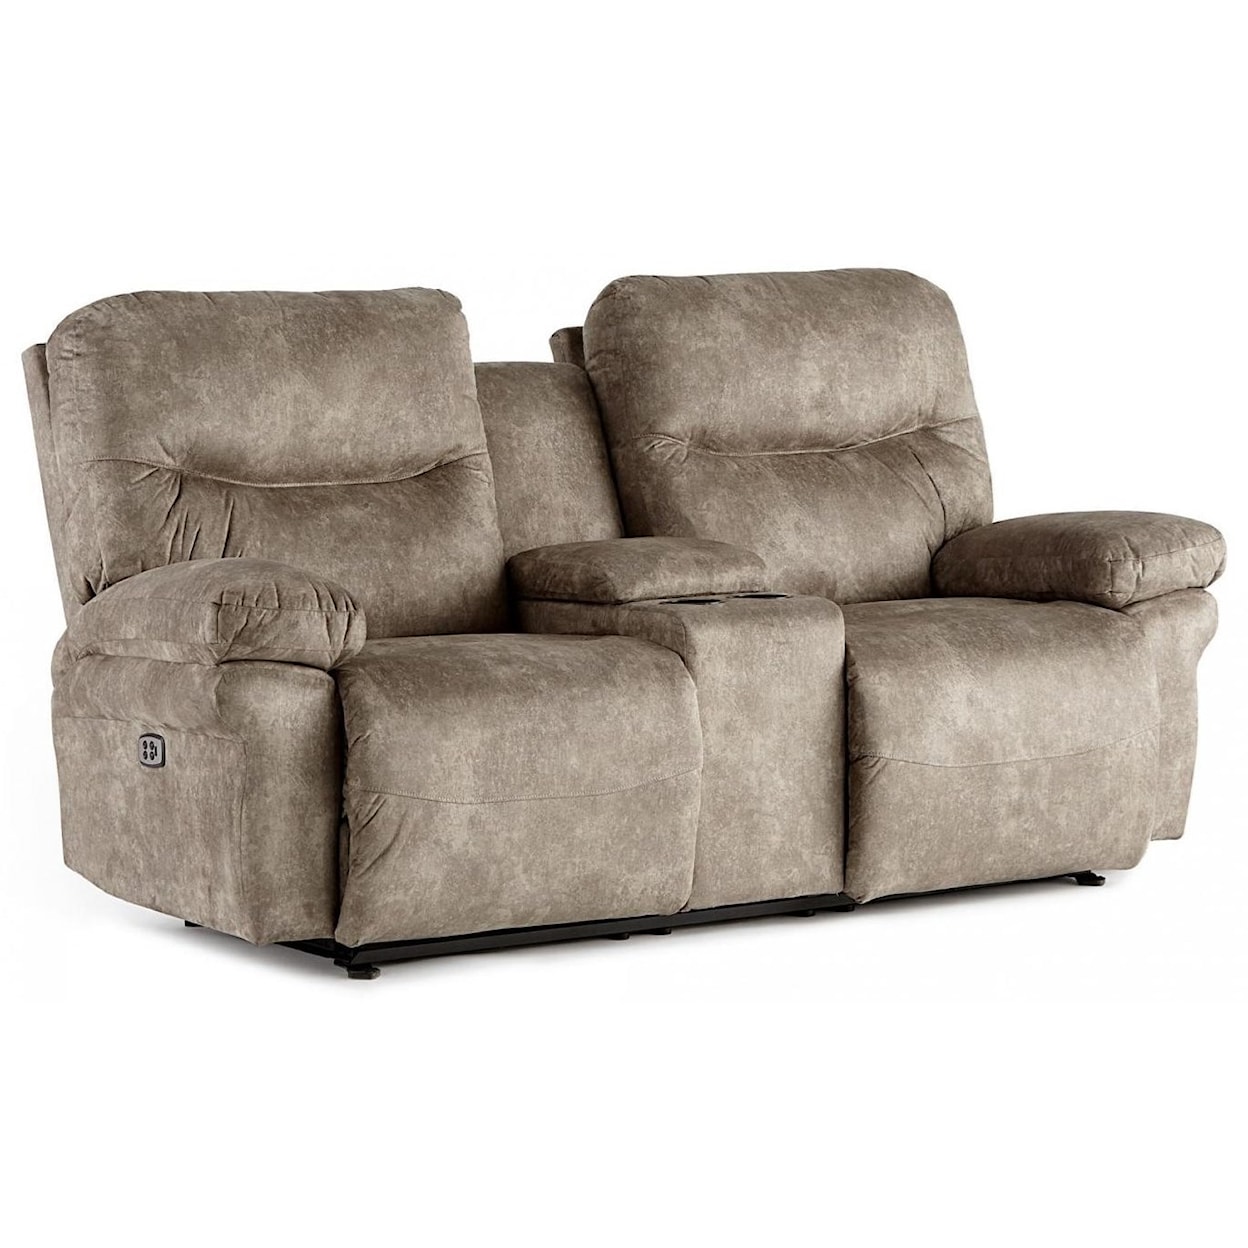 Best Home Furnishings Leya Manual Space Saver Loveseat with Console